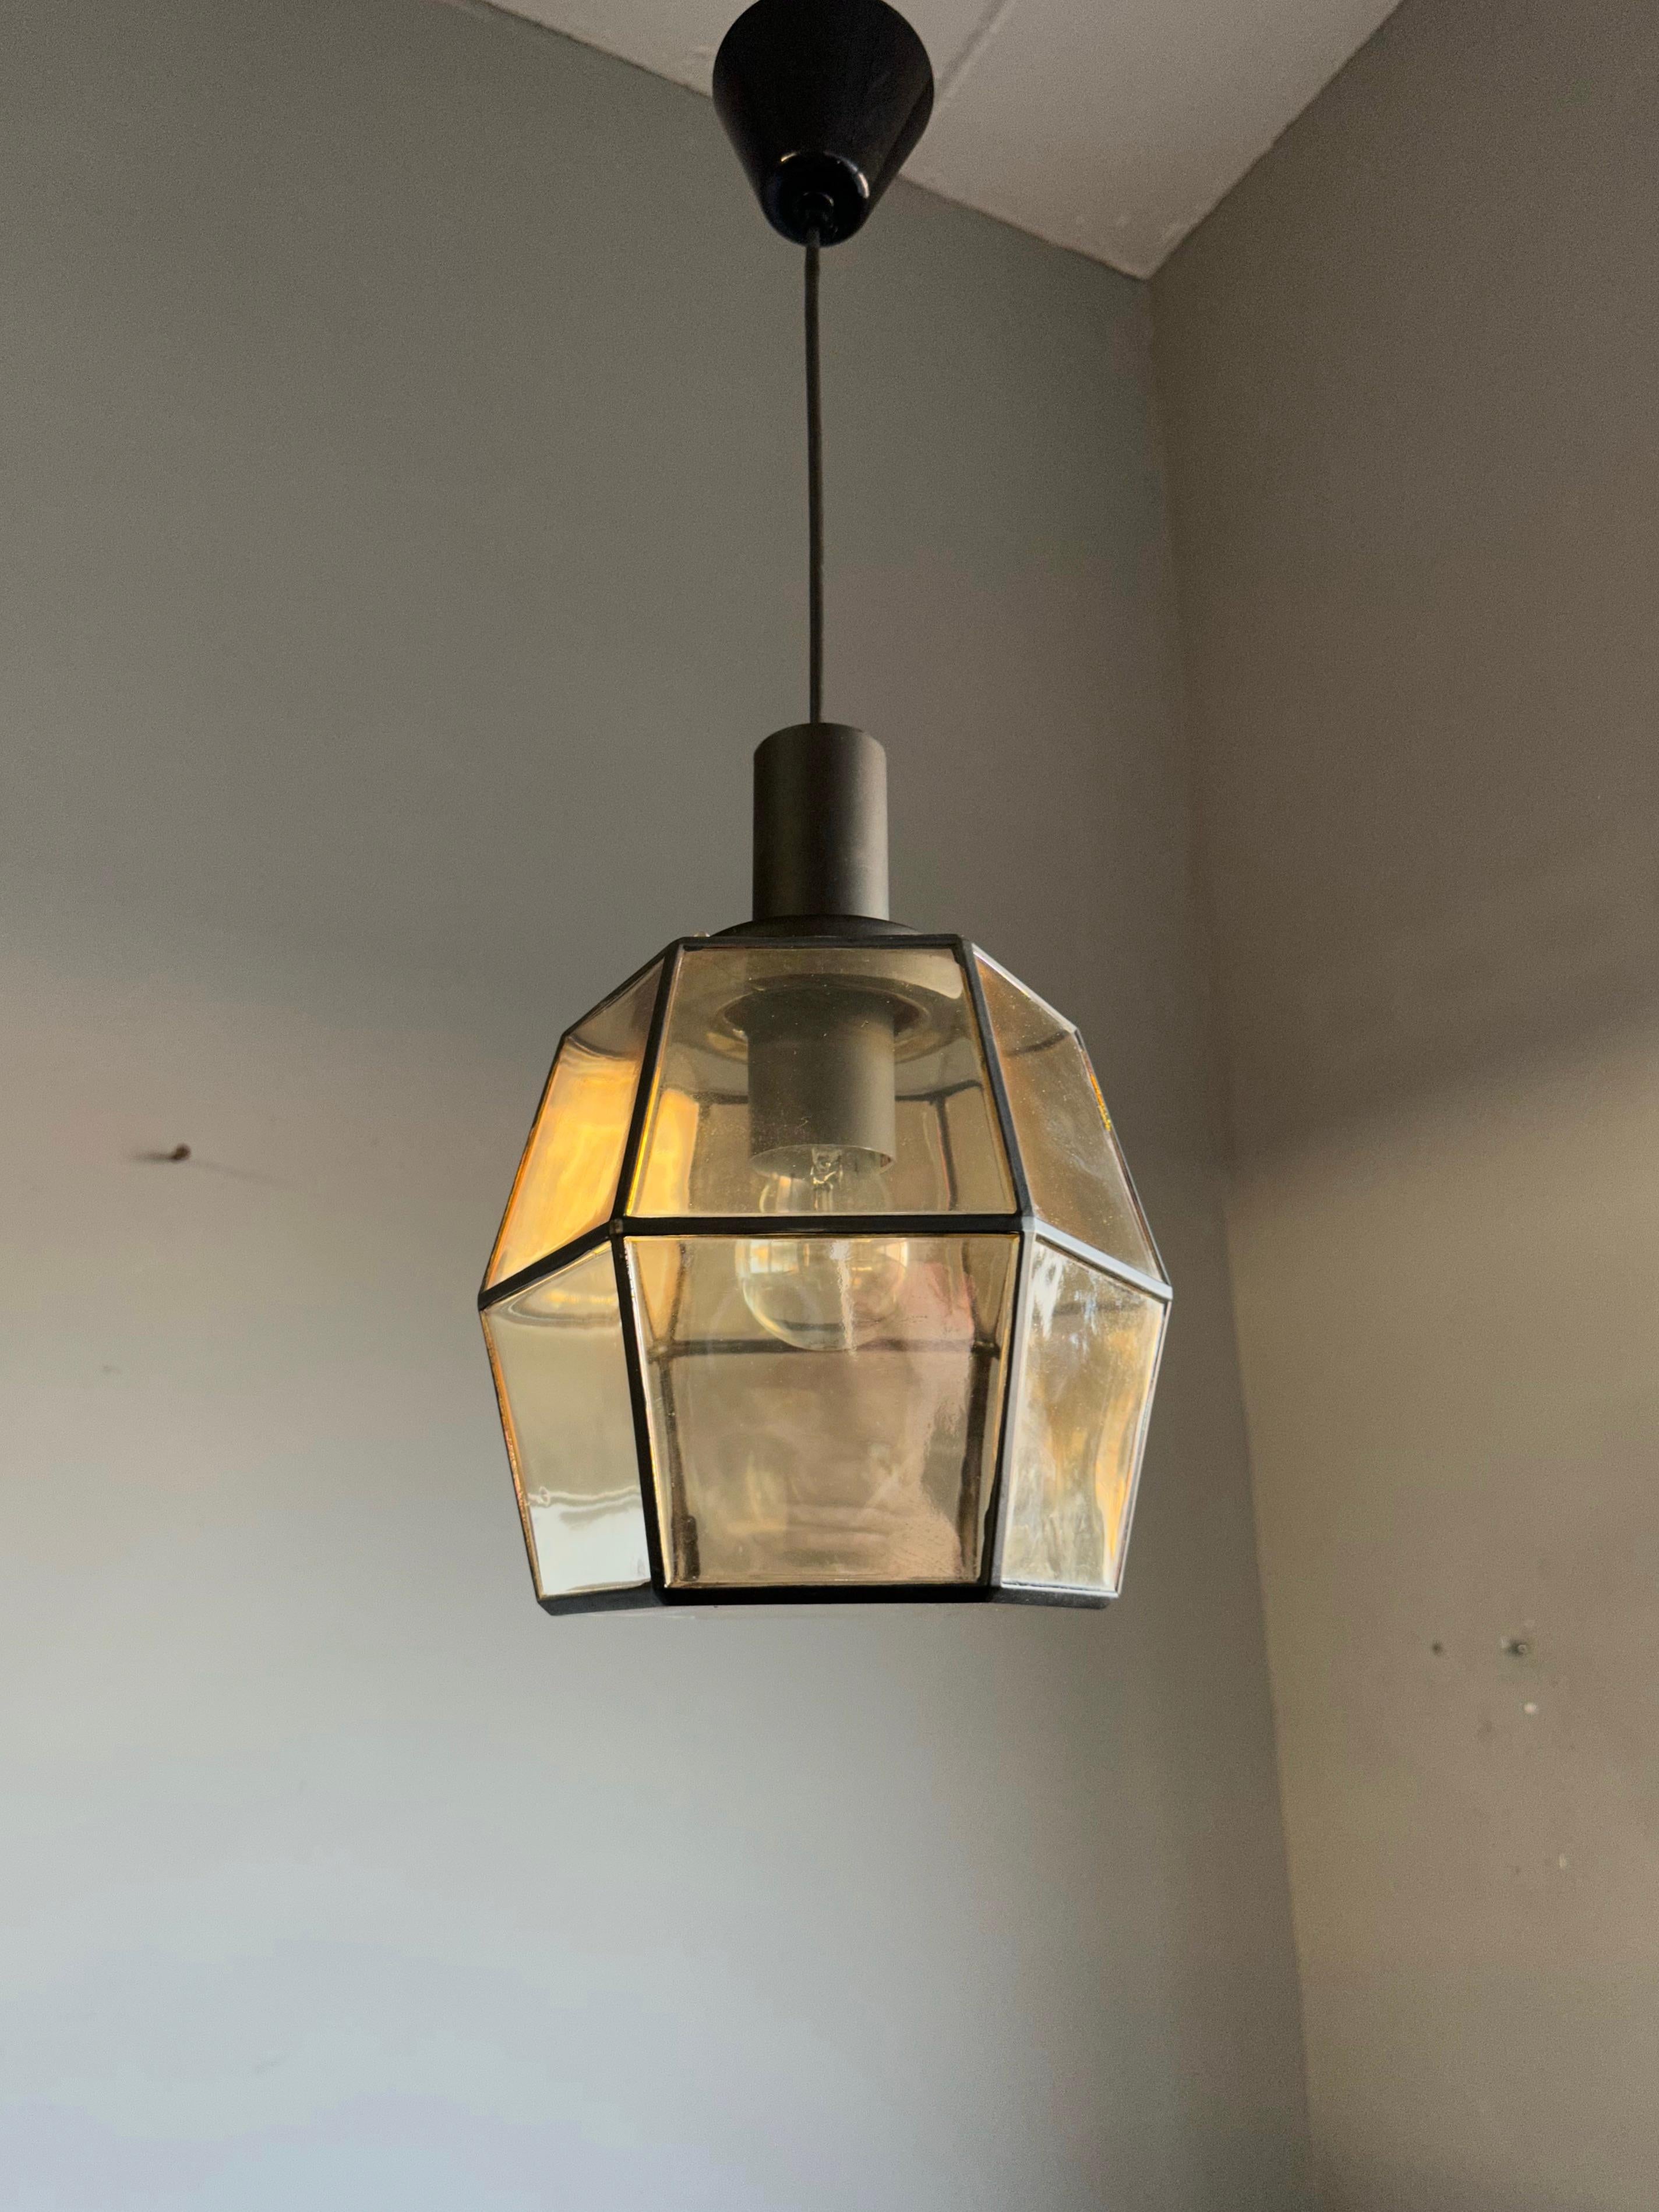 Timeless and good size mid-century pendant.

This rare ceiling lamp from the mid-century era could be the perfect lighting solution for an entrance or any other small living space. This handcrafred angular-globe design is a rare sight and an